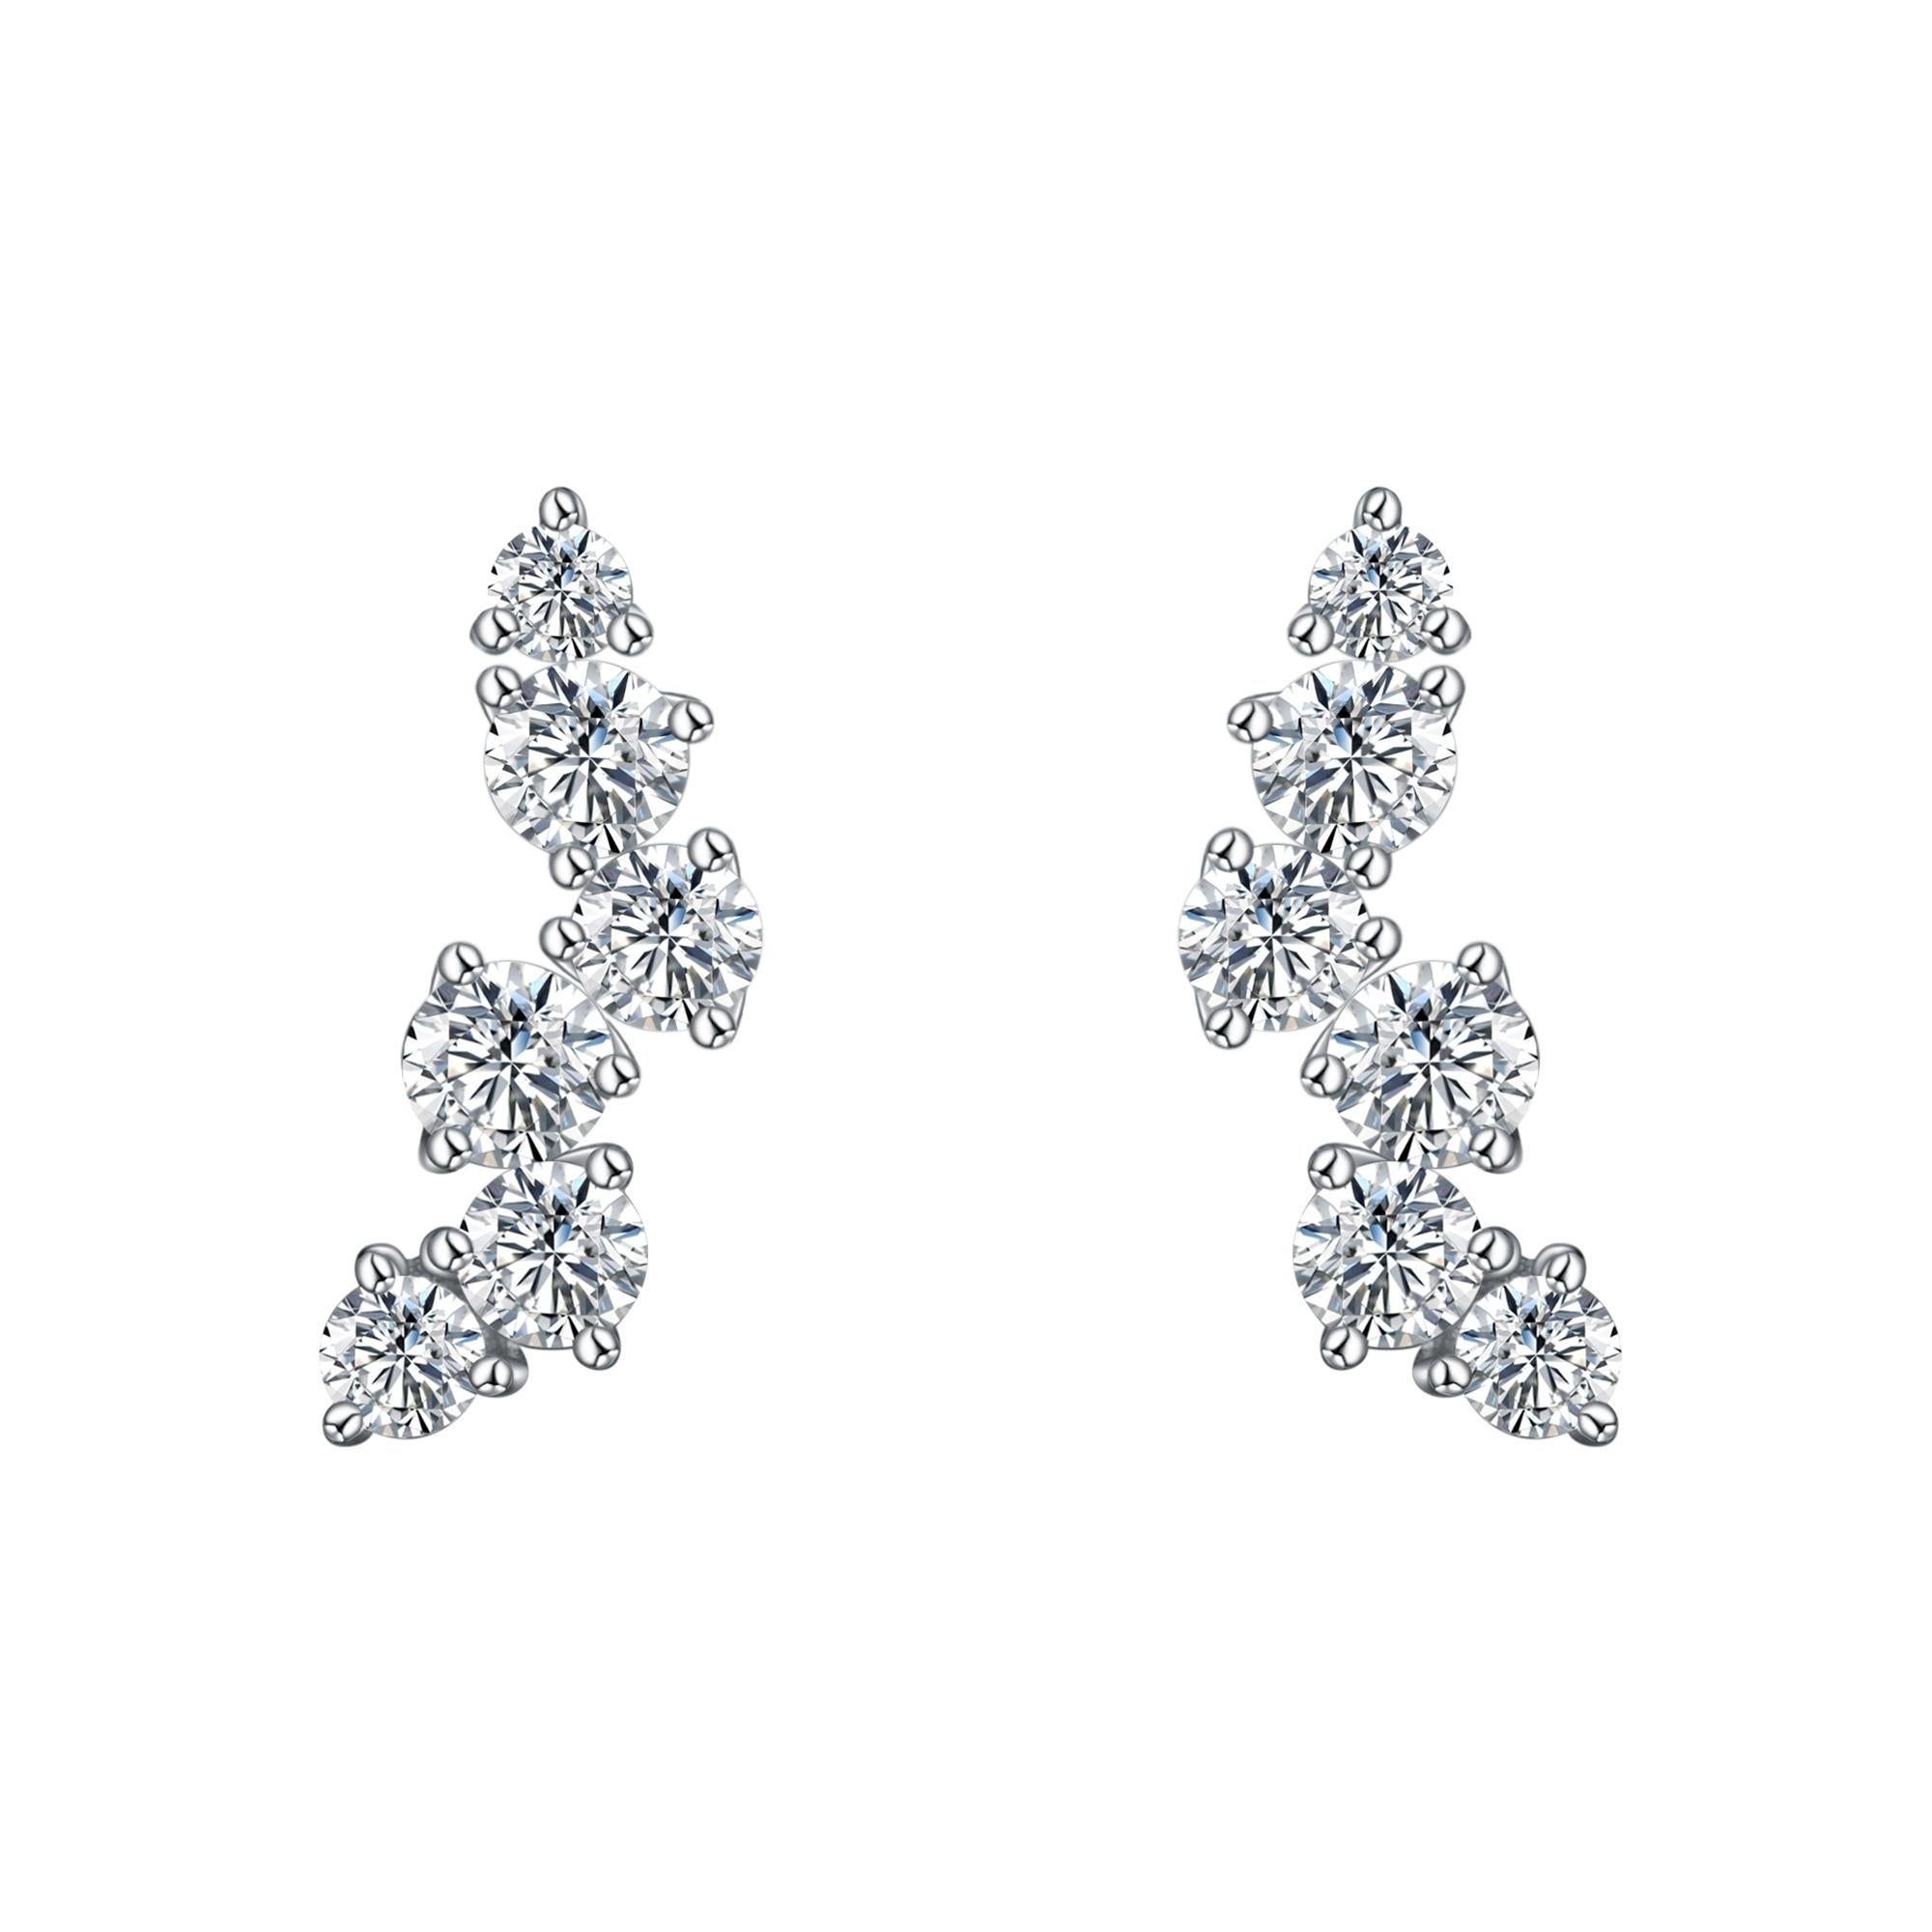 18K White Gold Diamond Cluster Earrings, 0.5 inches.
Gold Weight: 2.30
Diamonds Carats: 0.566
Diamonds Color: G
Diamonds Clarity: VS
Hestia Jewels

Modern diamond cluster earrings, ideal for everyday, evening, or bridal and alternative wedding.

THE